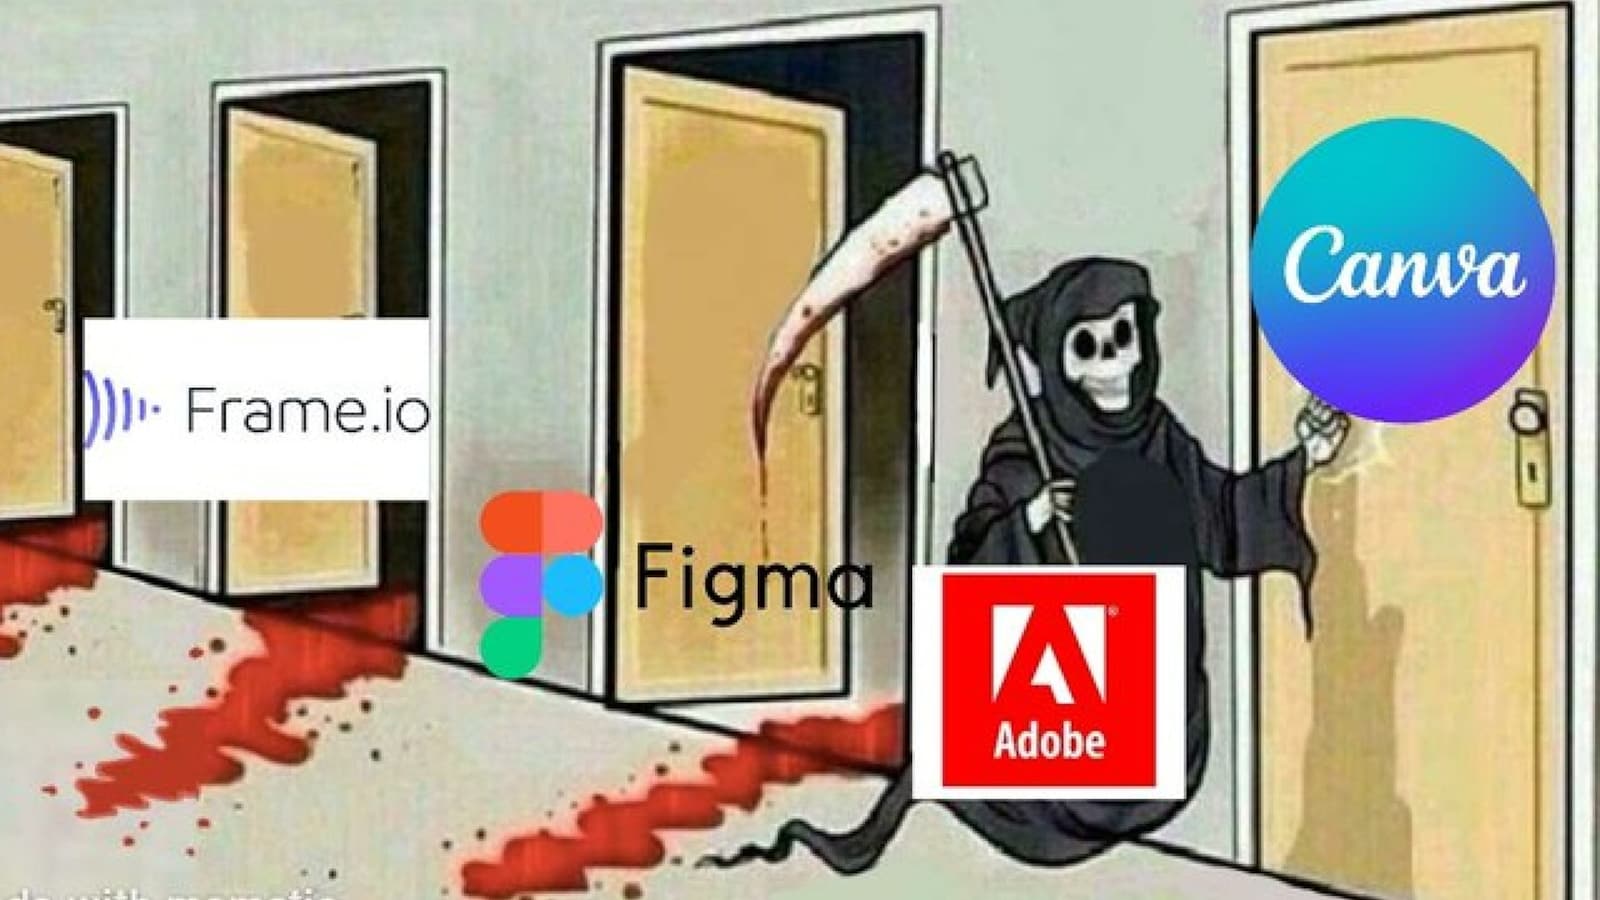 Adobe to acquire Figma in $20 billion deal. Cue the memes